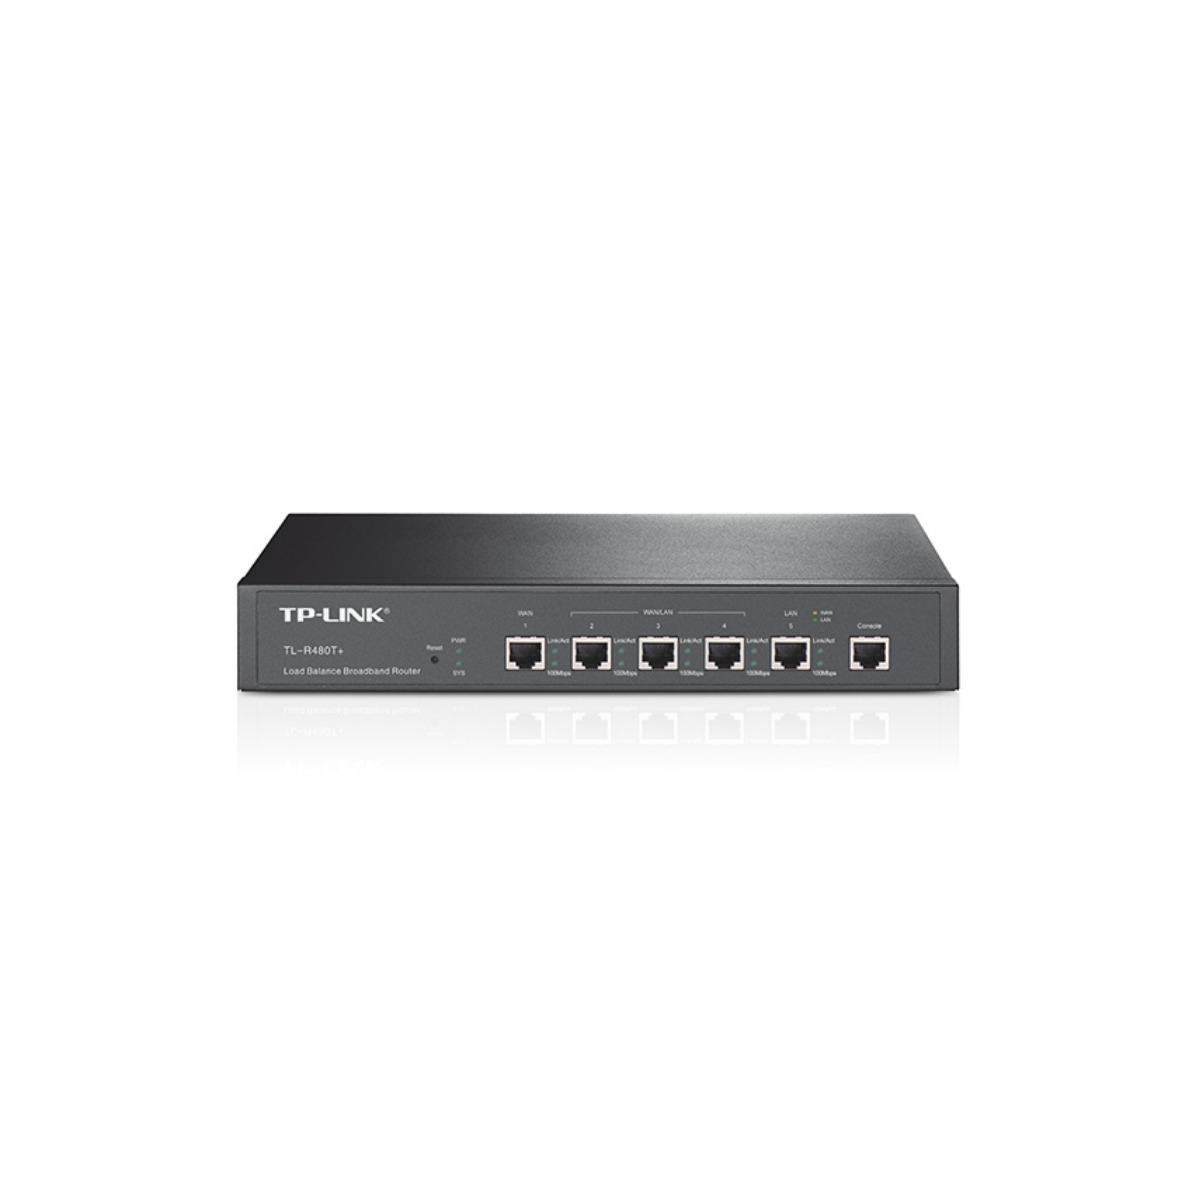 TP-LINK TP-Link TL-R480T+ 3-Port-Switch - - 5 2 WAN-Ports: Switch Router TL-R480T+ 